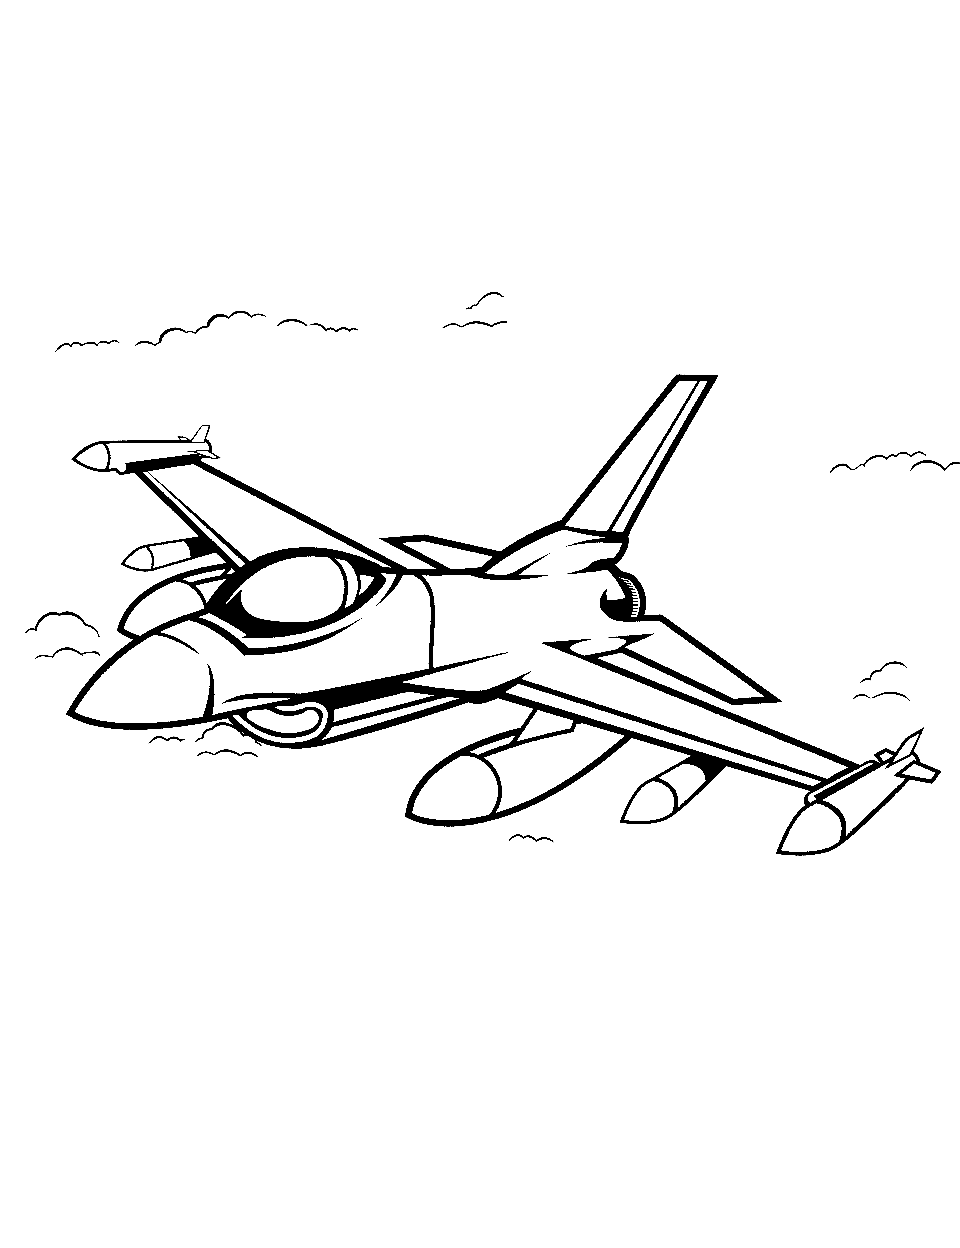 Air Force Fighter Jet Airplane Coloring Page - A powerful fighter jet from the Air Force zooming through the sky.